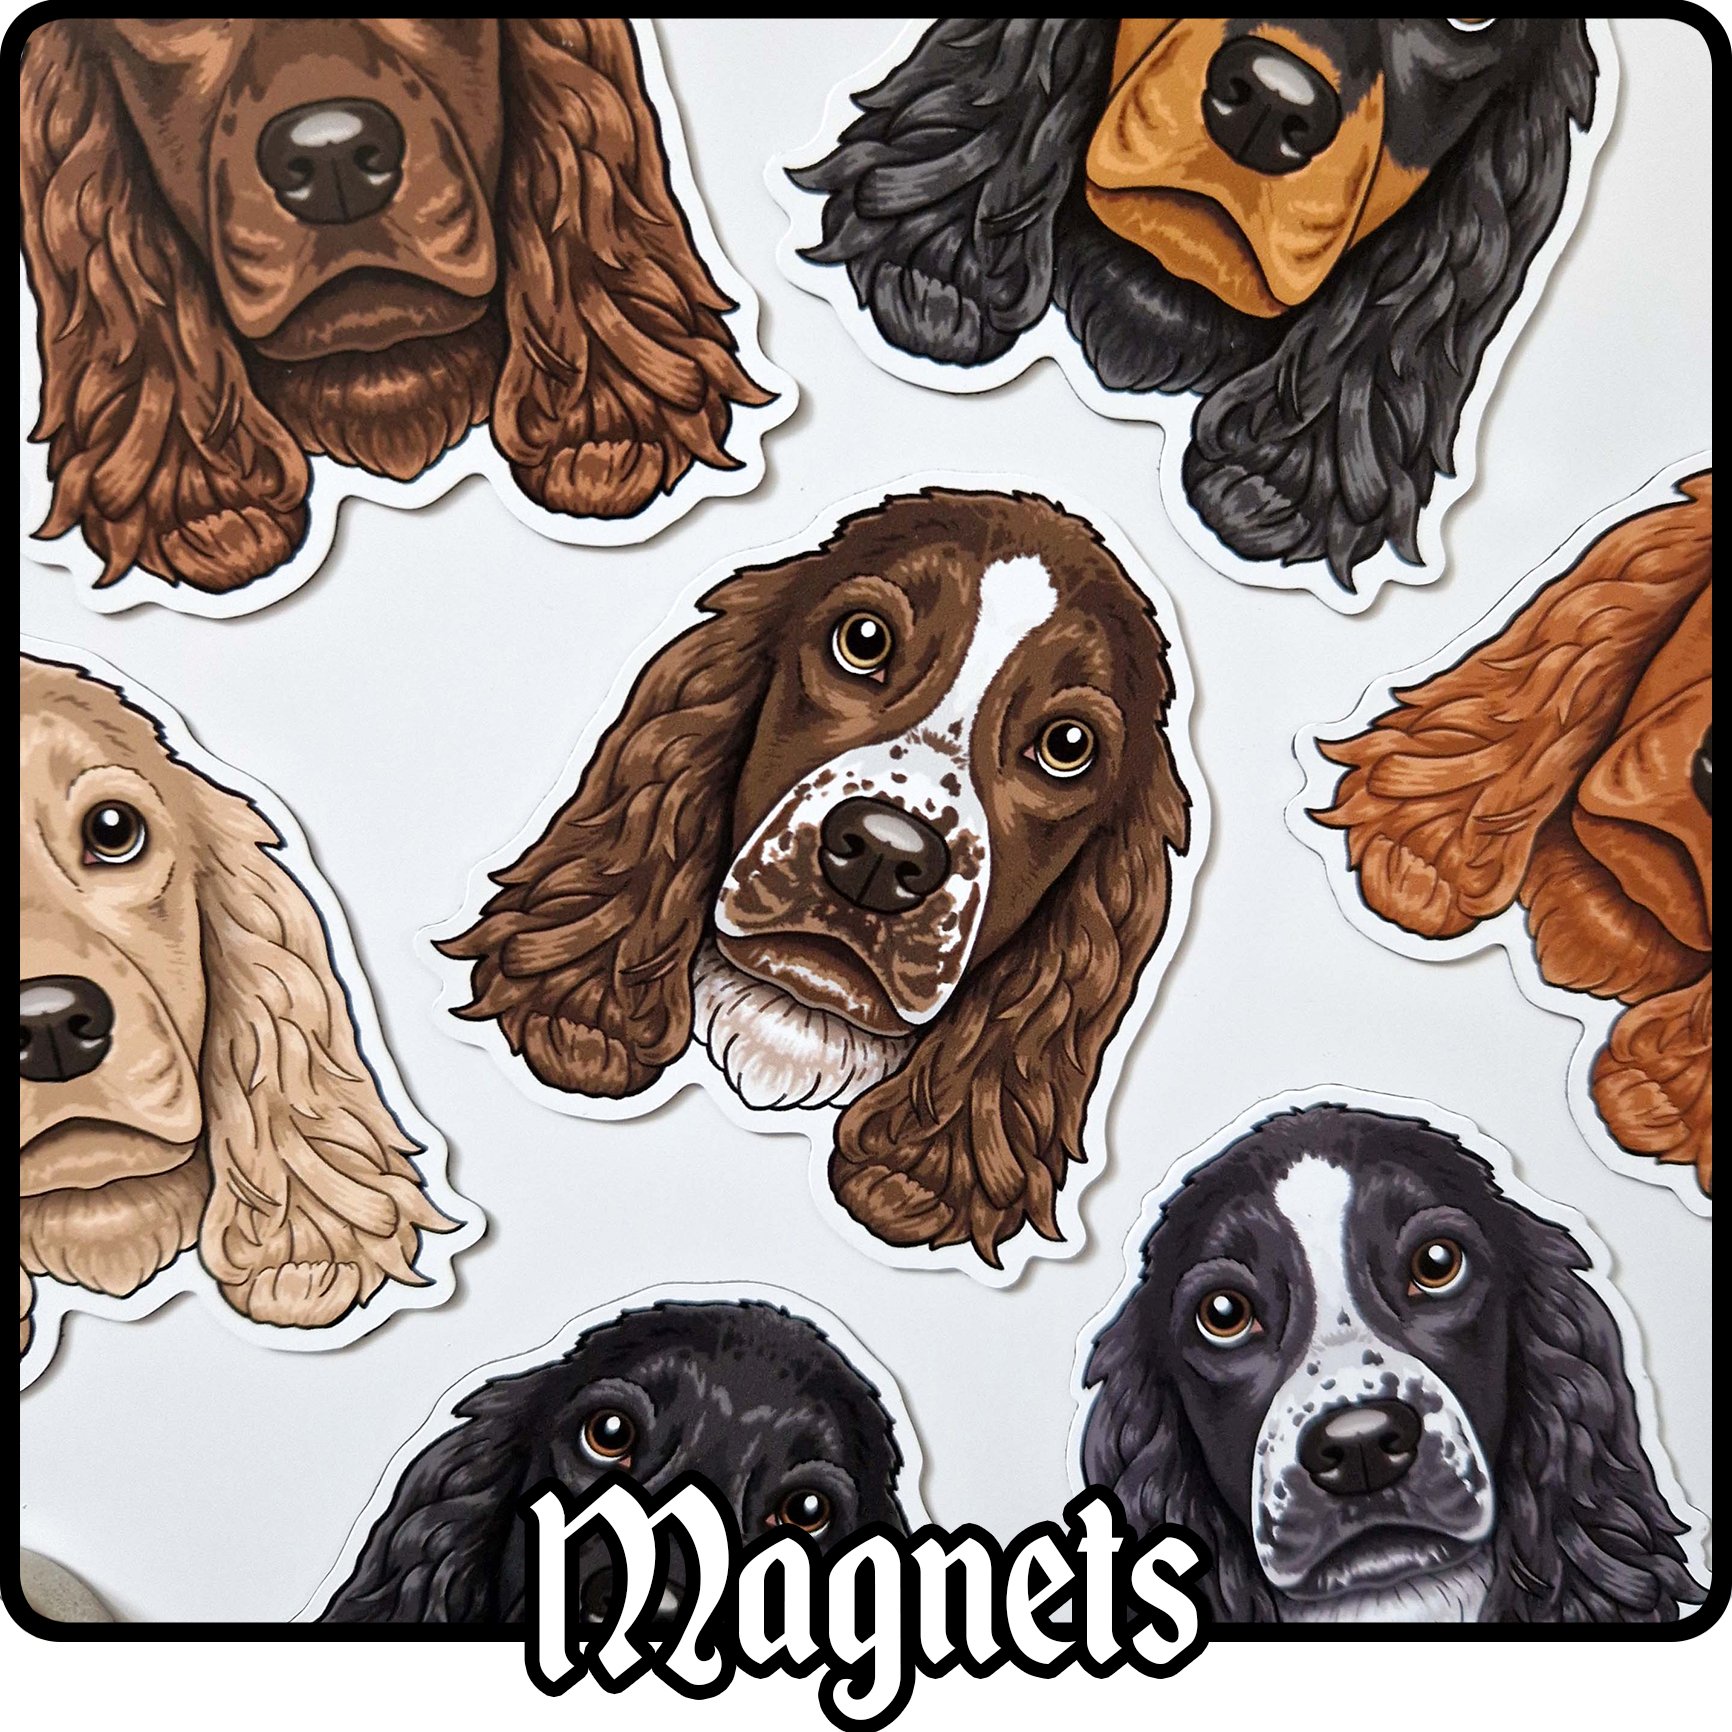 magnets browse store for dog magnets art designs spaniel dog breed stickers.jpg